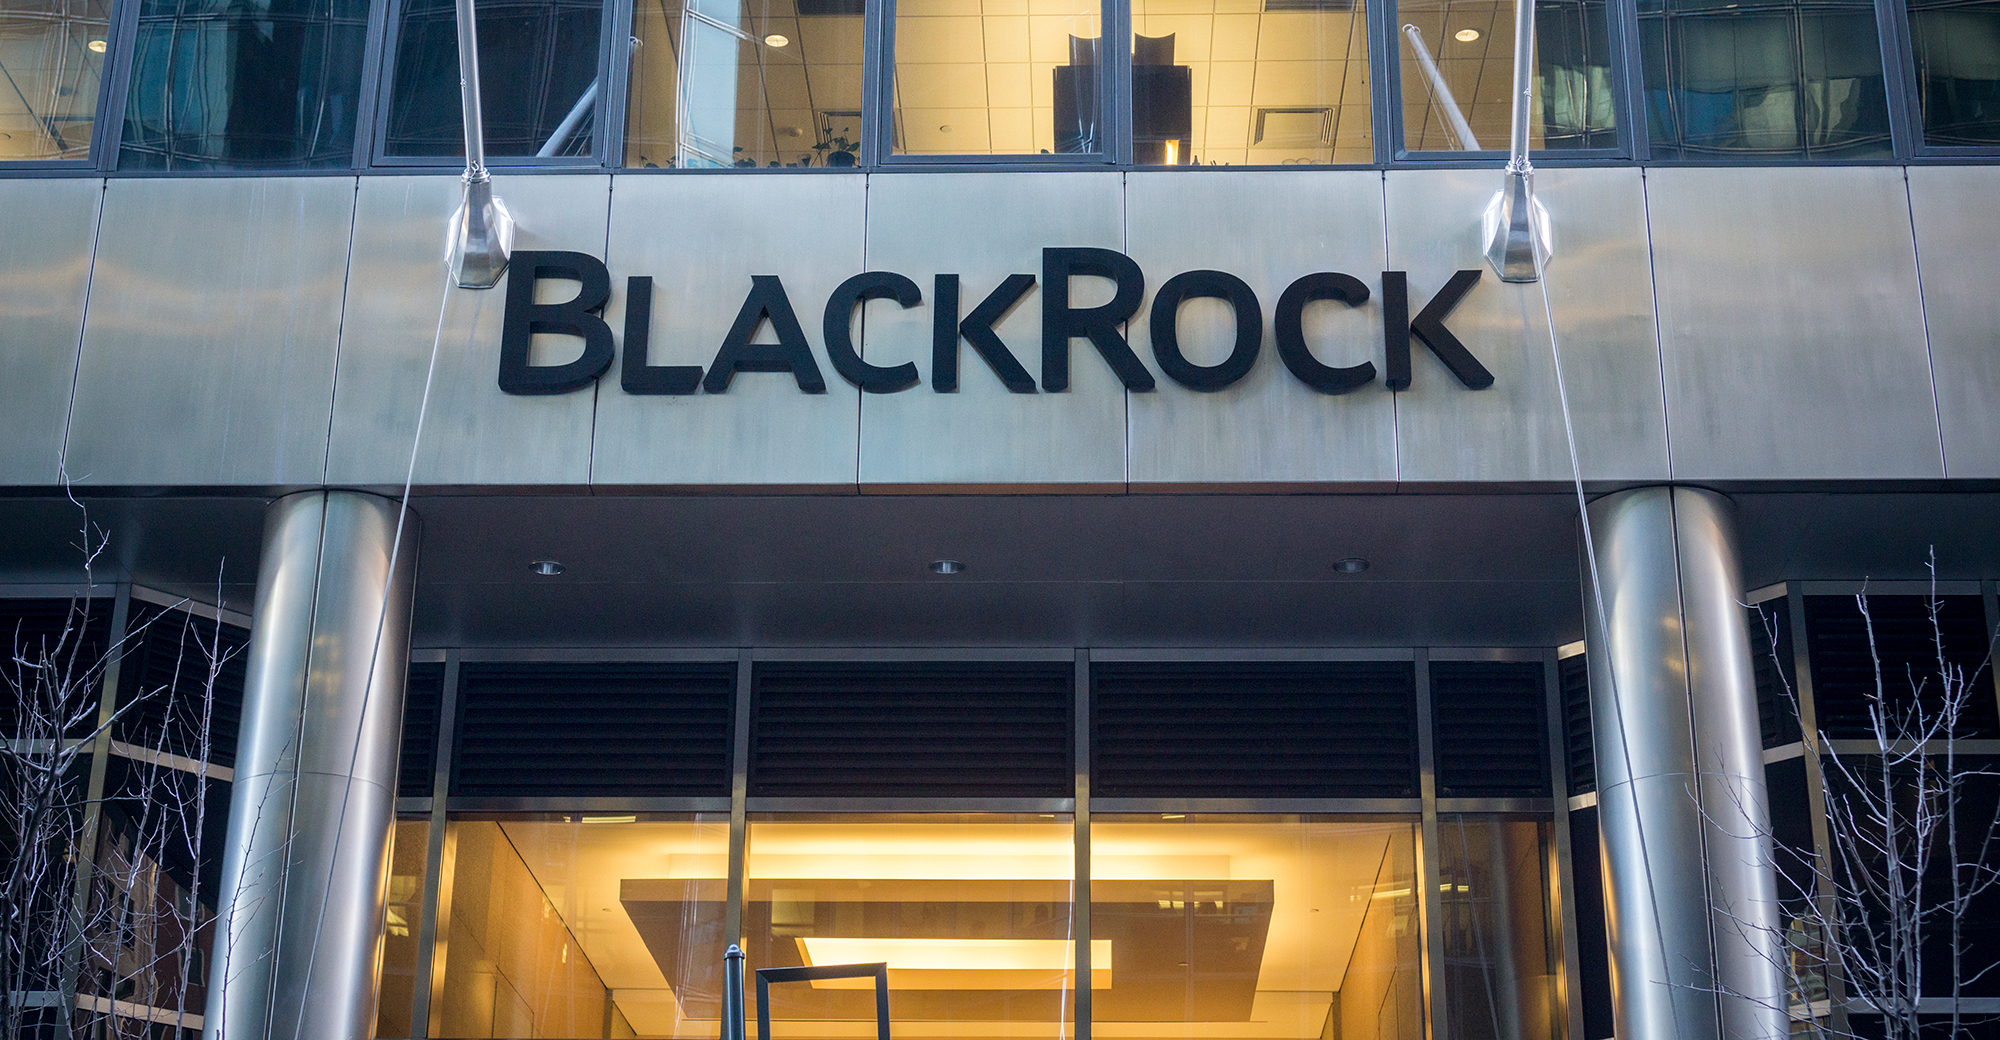 BlackRock is hiring for the role of Data Engineering Associate | Apply here!